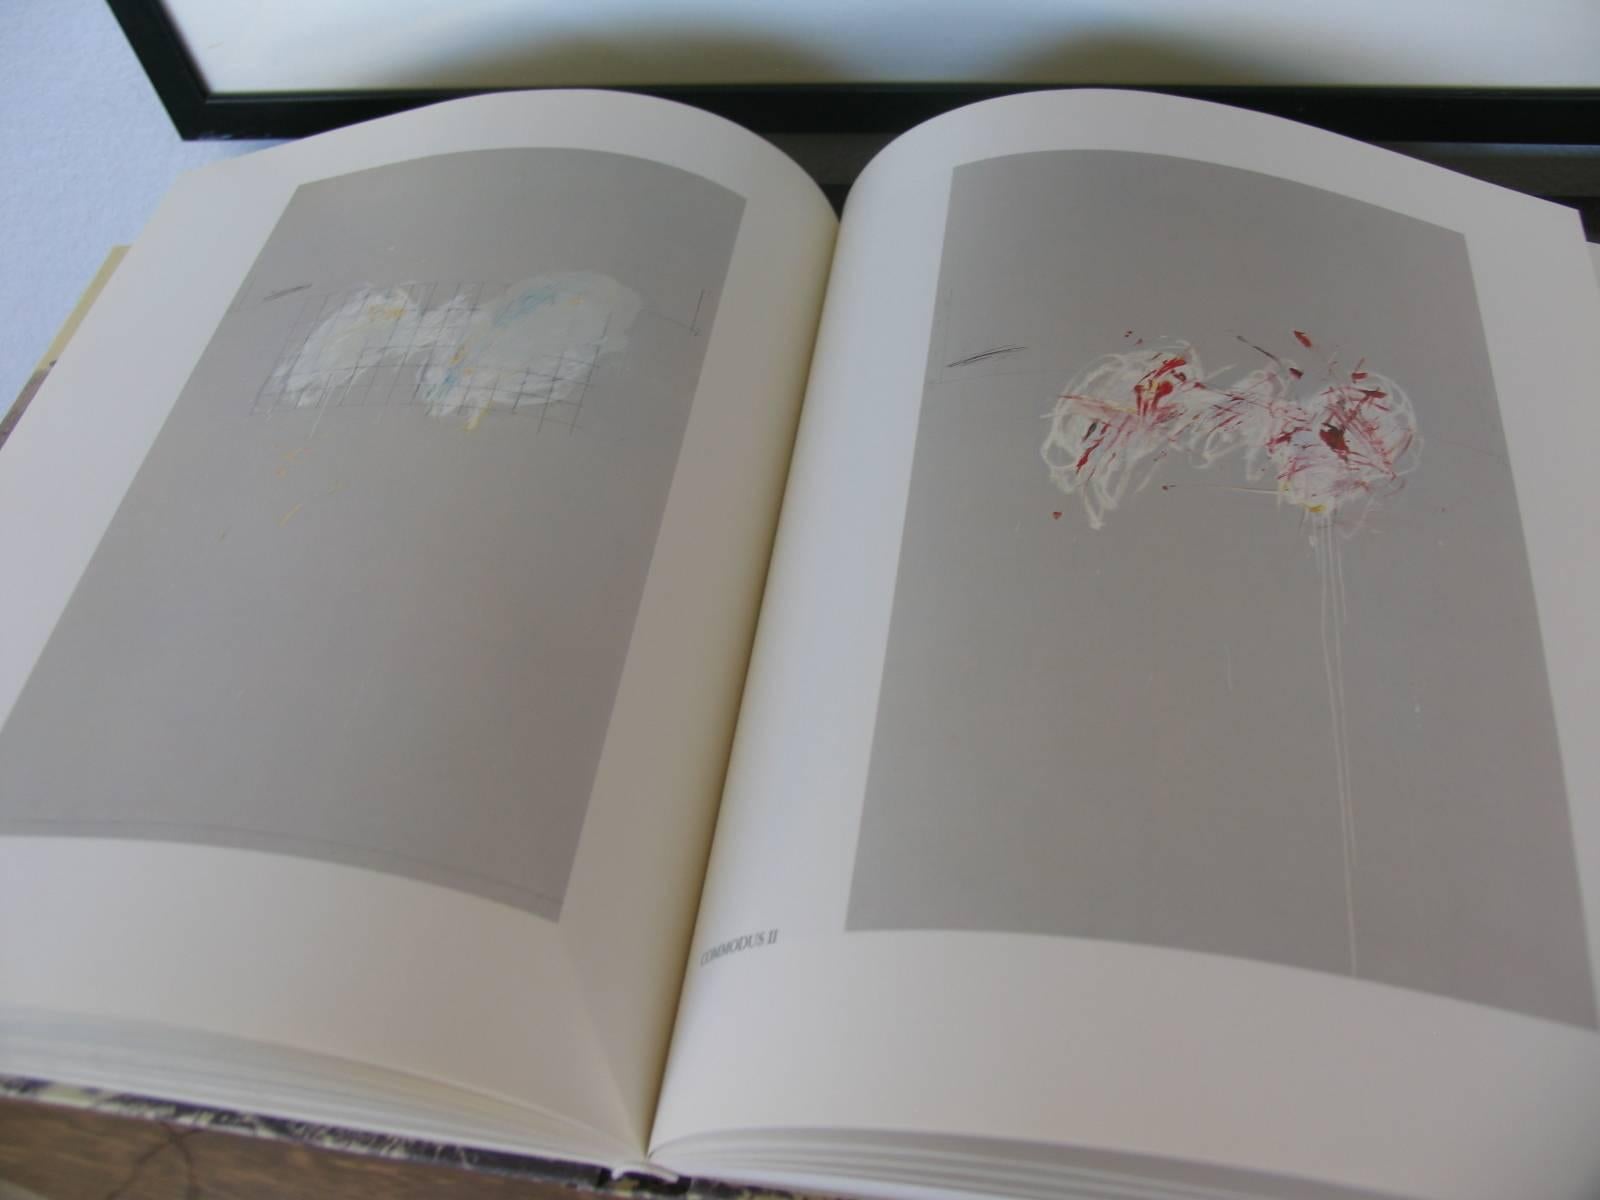 Cy Twombly Bilder Paintings 1952-1976, Volume 1, First Edition, 1978 In Excellent Condition For Sale In Surprise, AZ